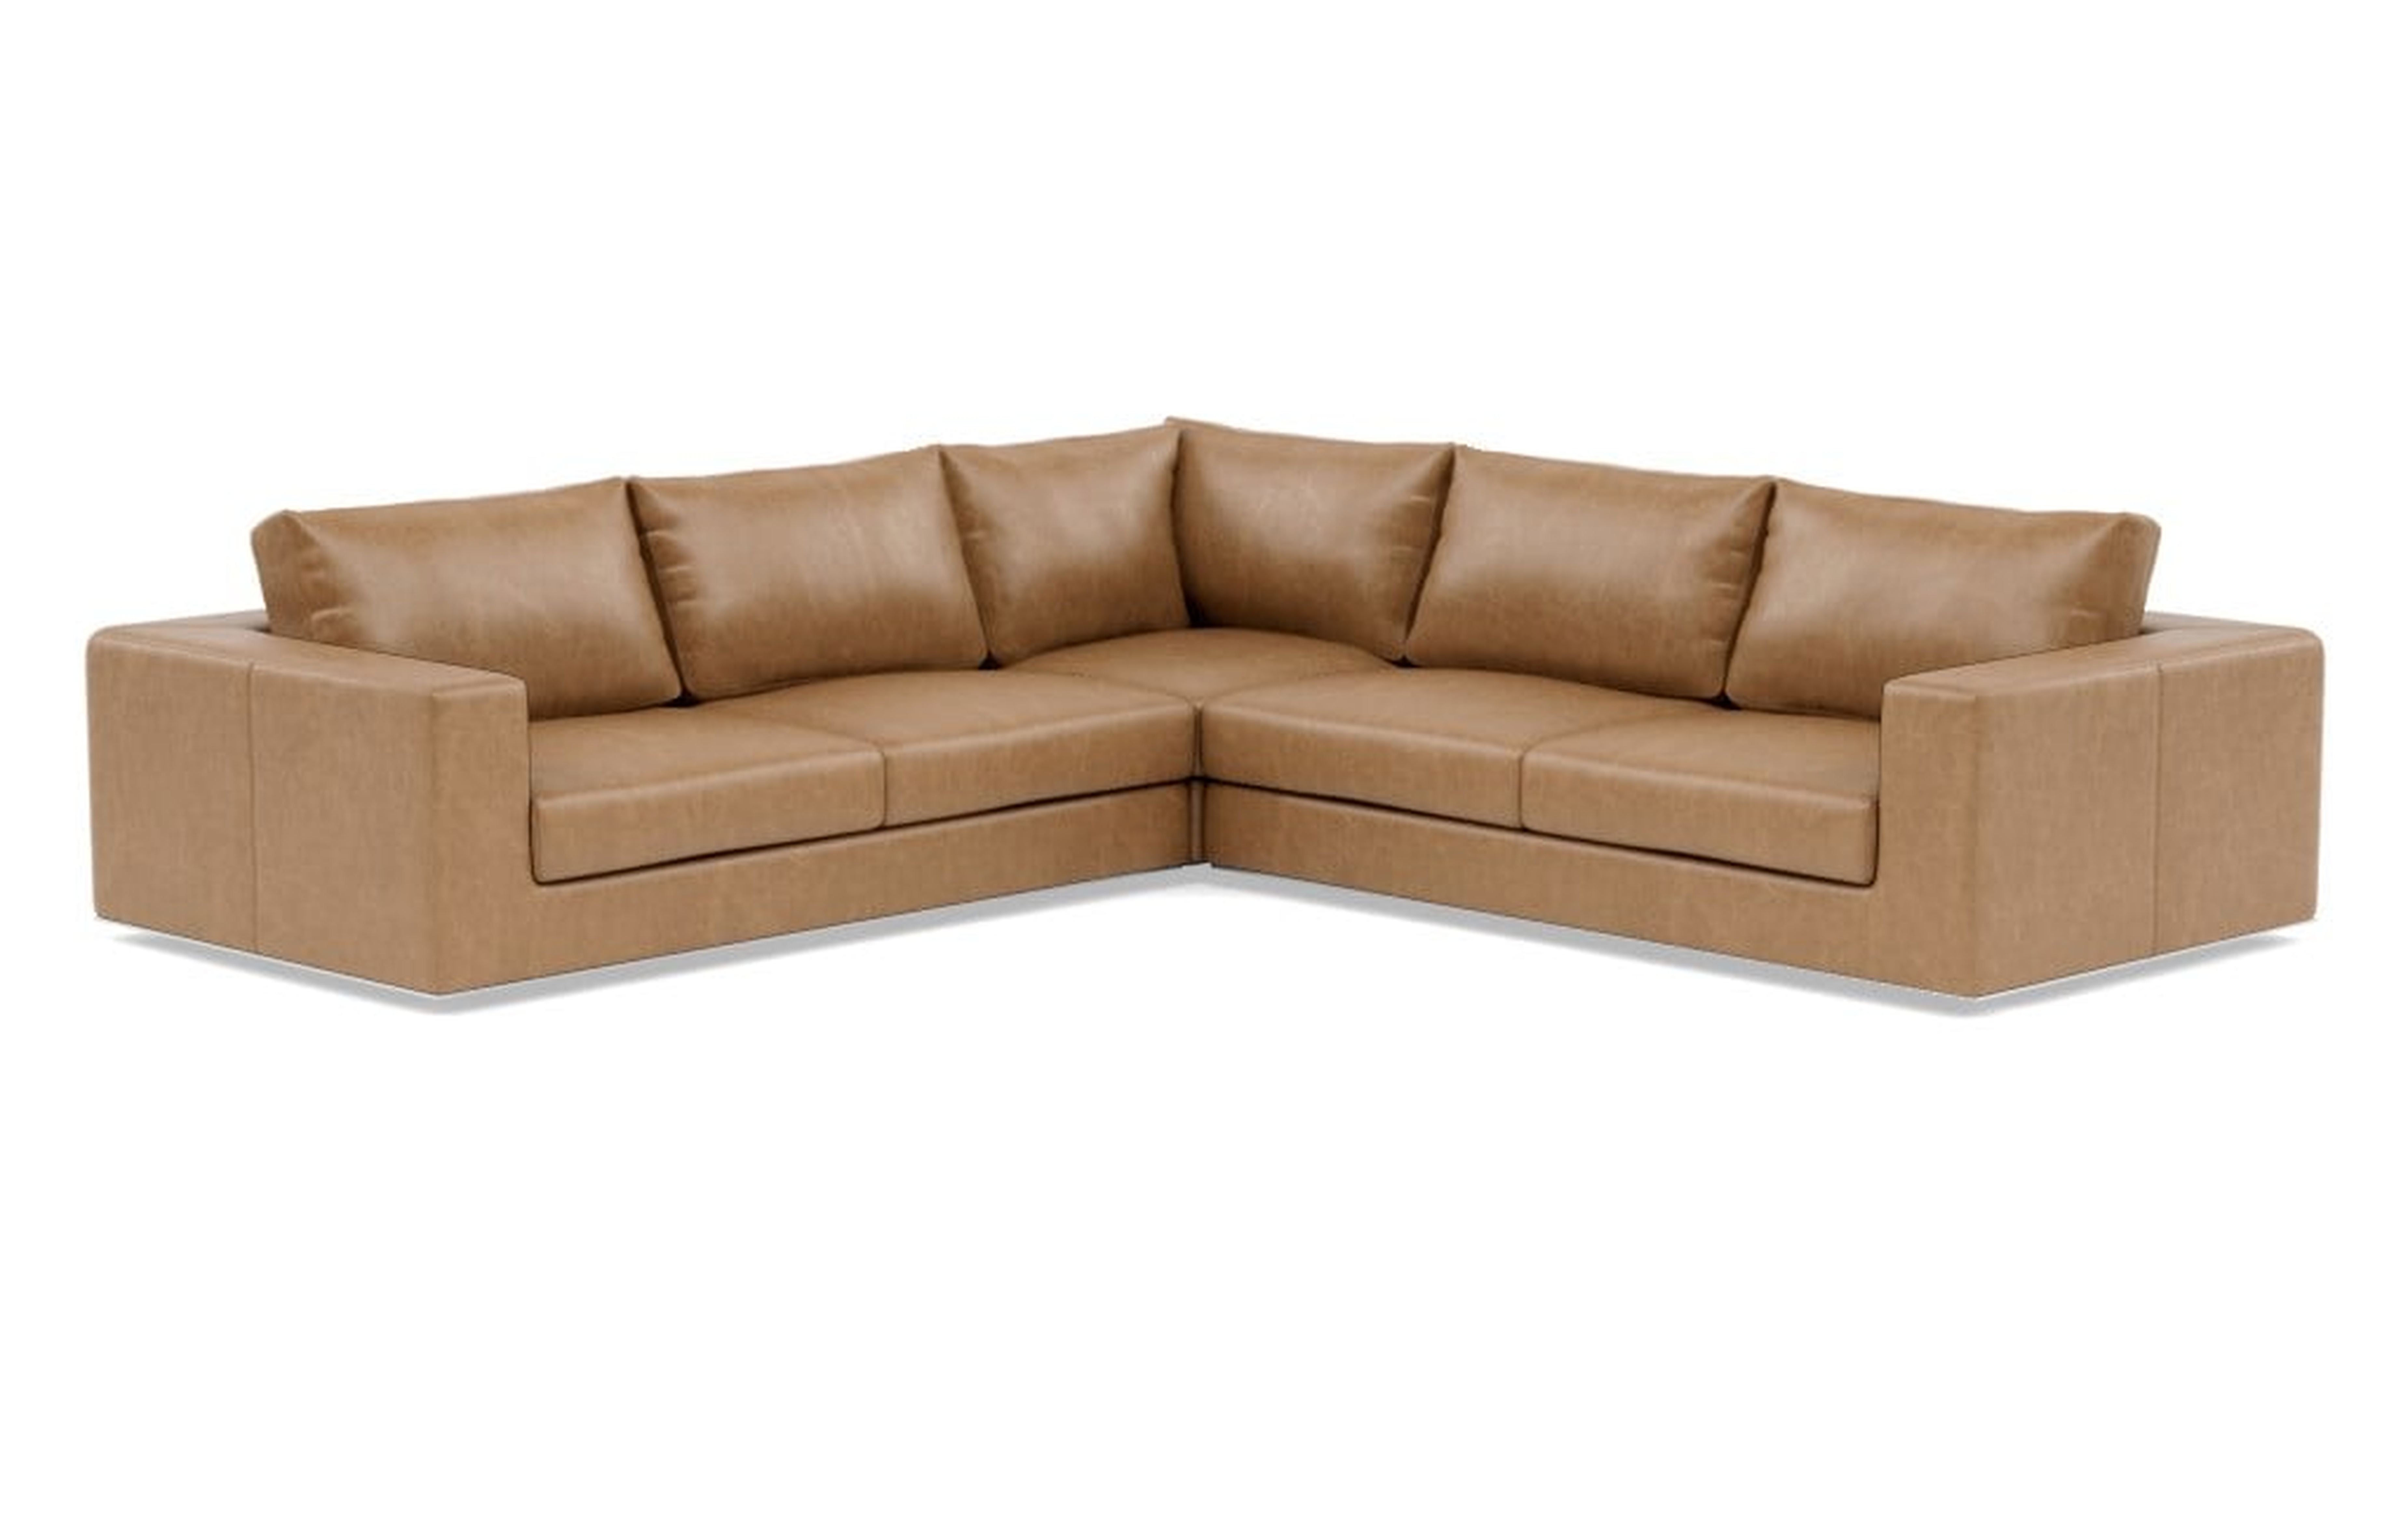 WALTERS Leather Corner Sectional Sofa // 119"x119" // Palomino Leather // Standard Cushion Fill - Interior Define